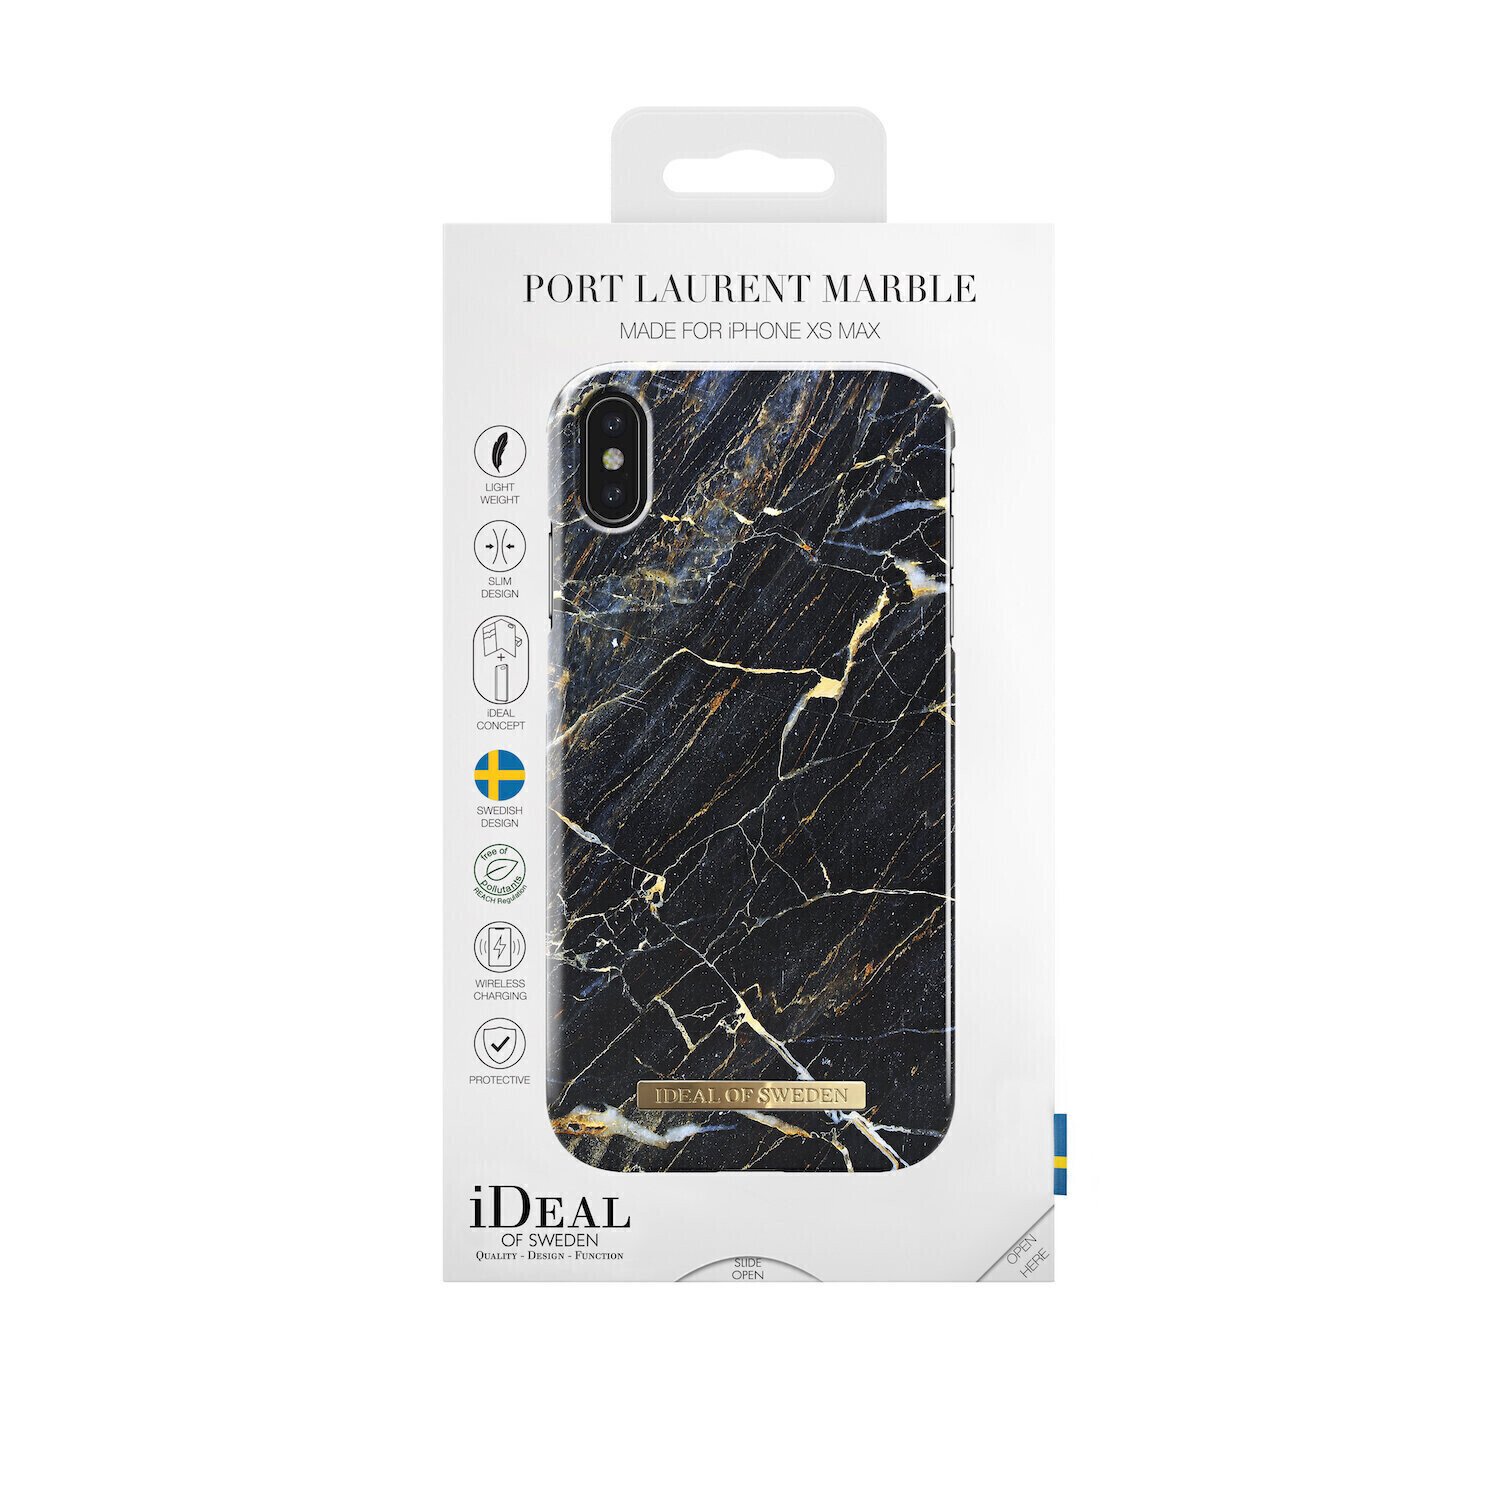 iDeal Of Sweden iPhone Xs Max Fashion Case A/W 16-17, Port Laurent Marble